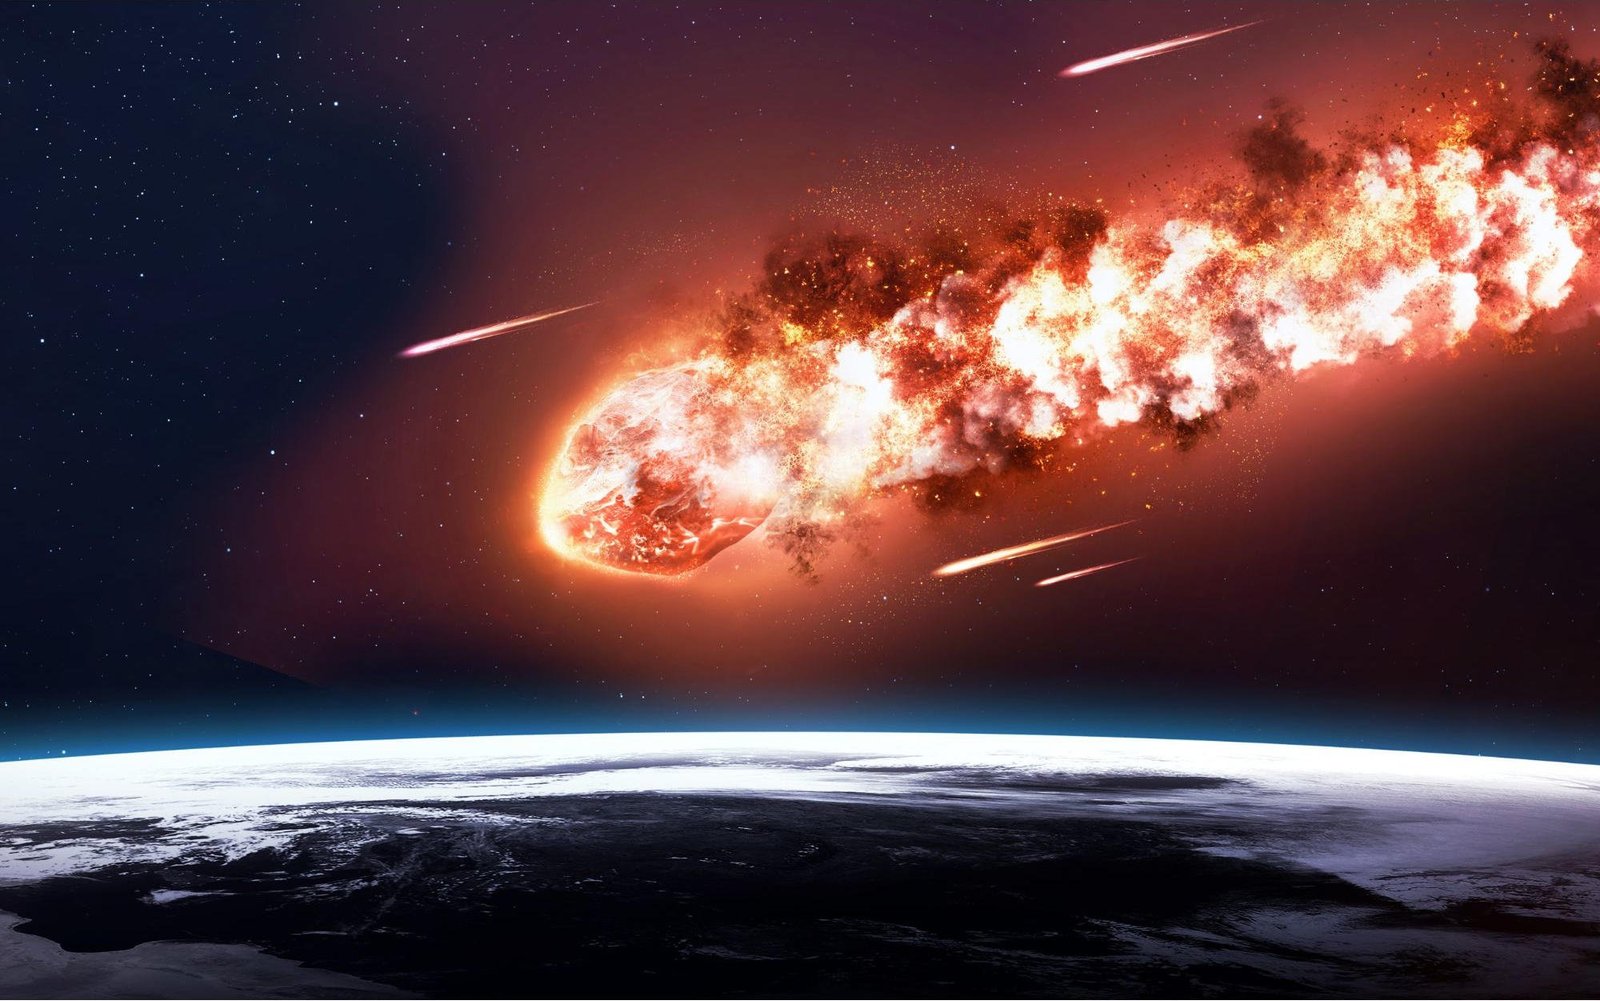 Scientists Uncover New Clues Regarding the Origin of Life on Earth Inside the Recently Recovered “Winchcombe” Meteorite